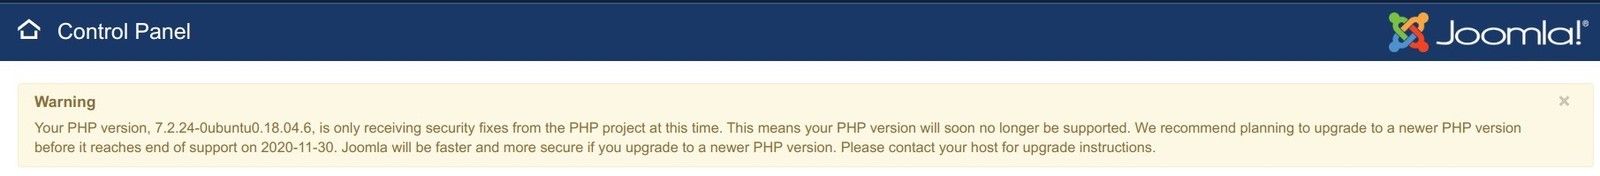 php eol warning message